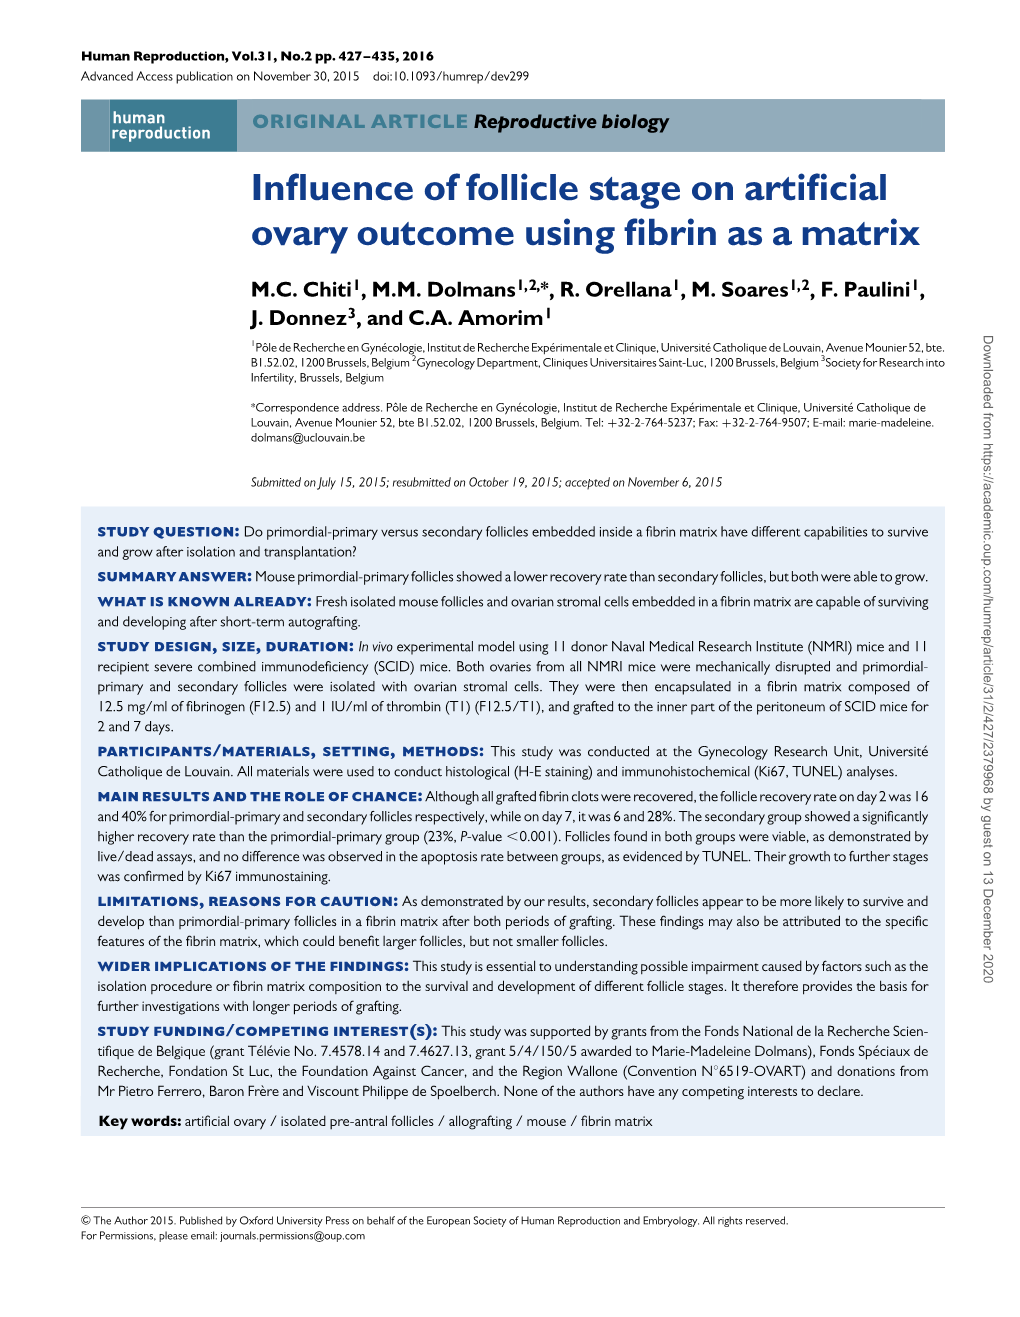 Influence of Follicle Stage on Artificial Ovary Outcome Using Fibrin As a Matrix